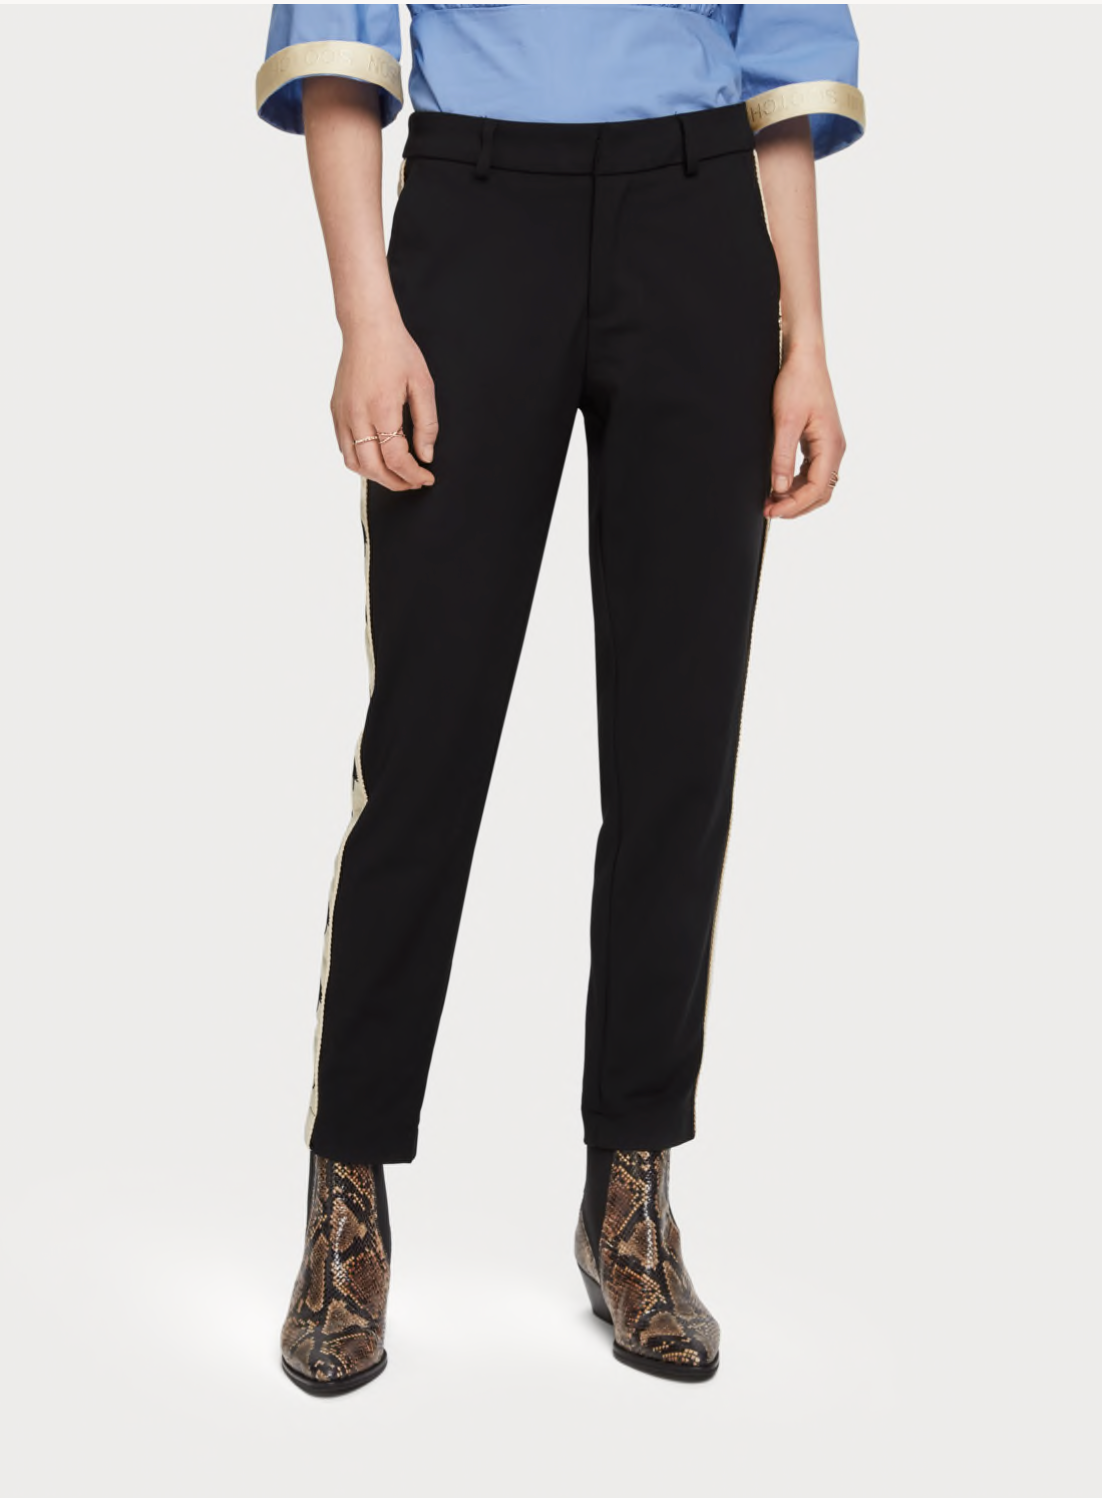 (New) Tailored Pants with Embroidered Side Panel